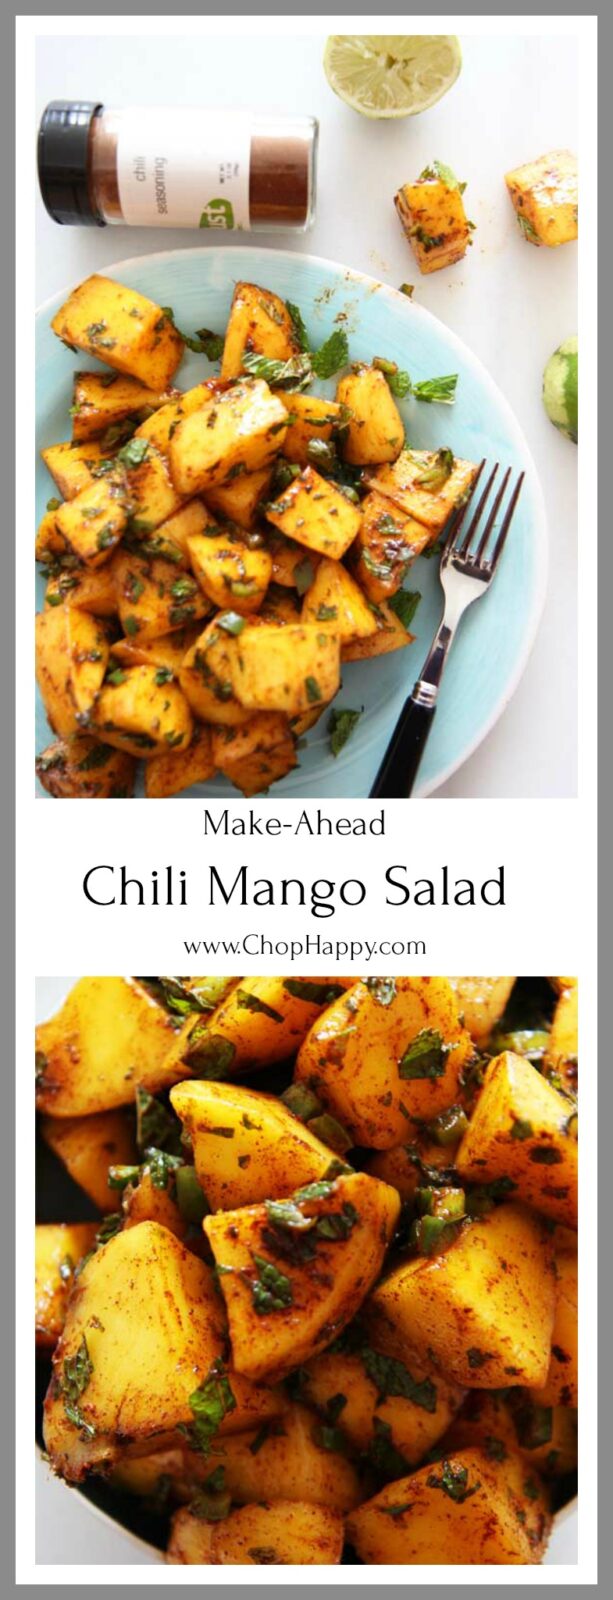 Sunshine Mango Salad Recipe is so refreshing. If your in a rush or beginner cook this recipe is for you. Its so easy to make and is sweet, smokey, and a hint of spice.